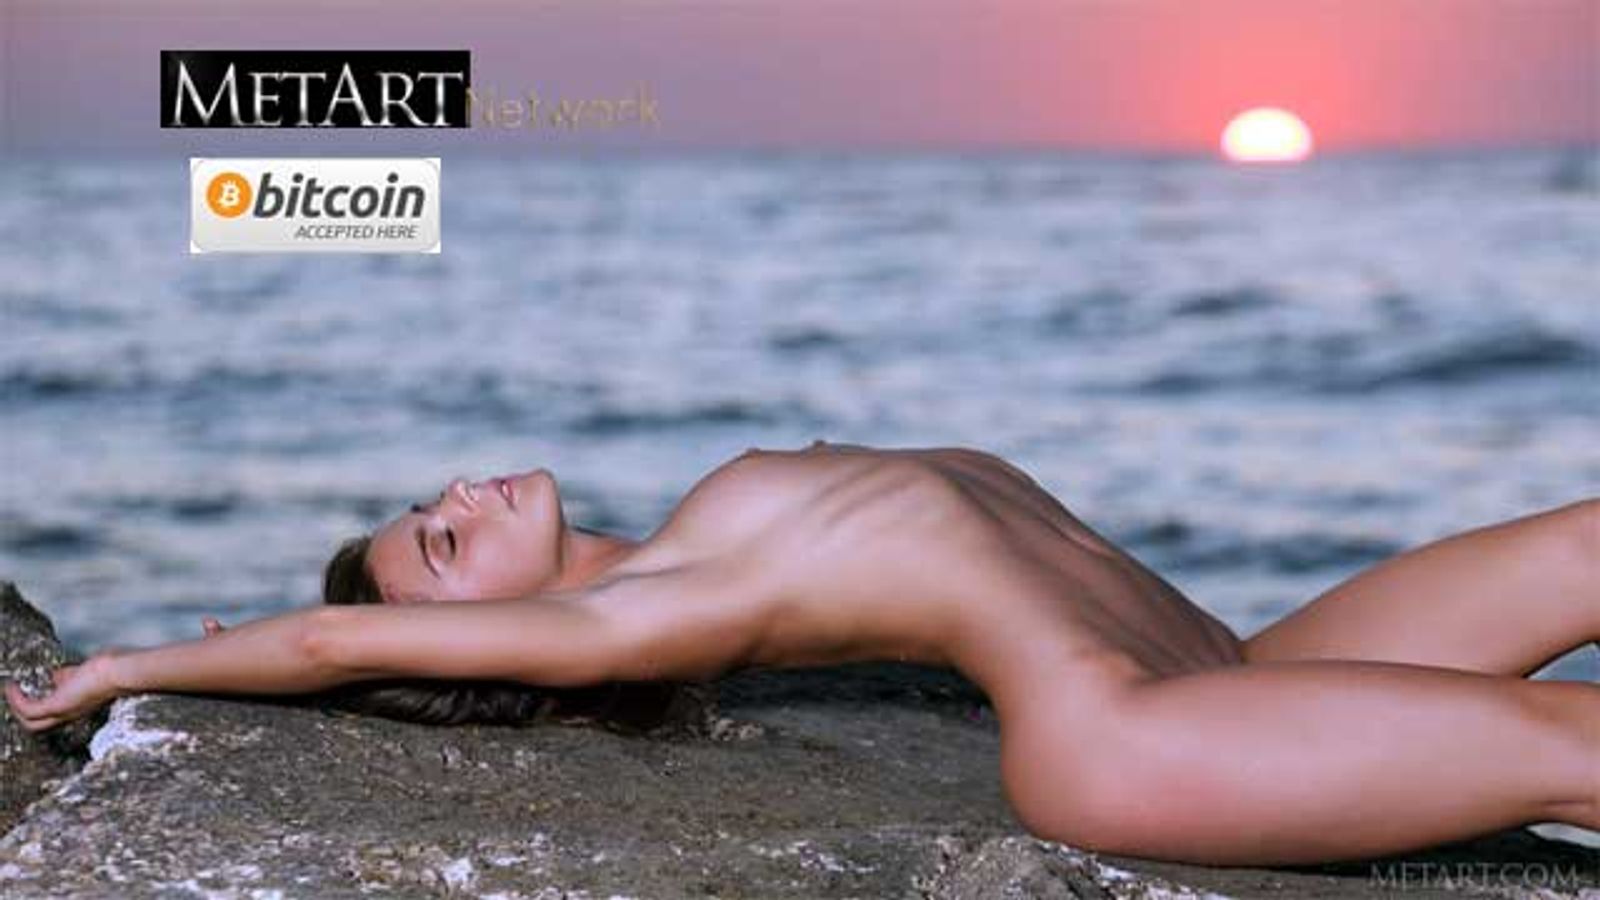 MetArt Network Now Accepting Bitcoins as Payment for All Sites